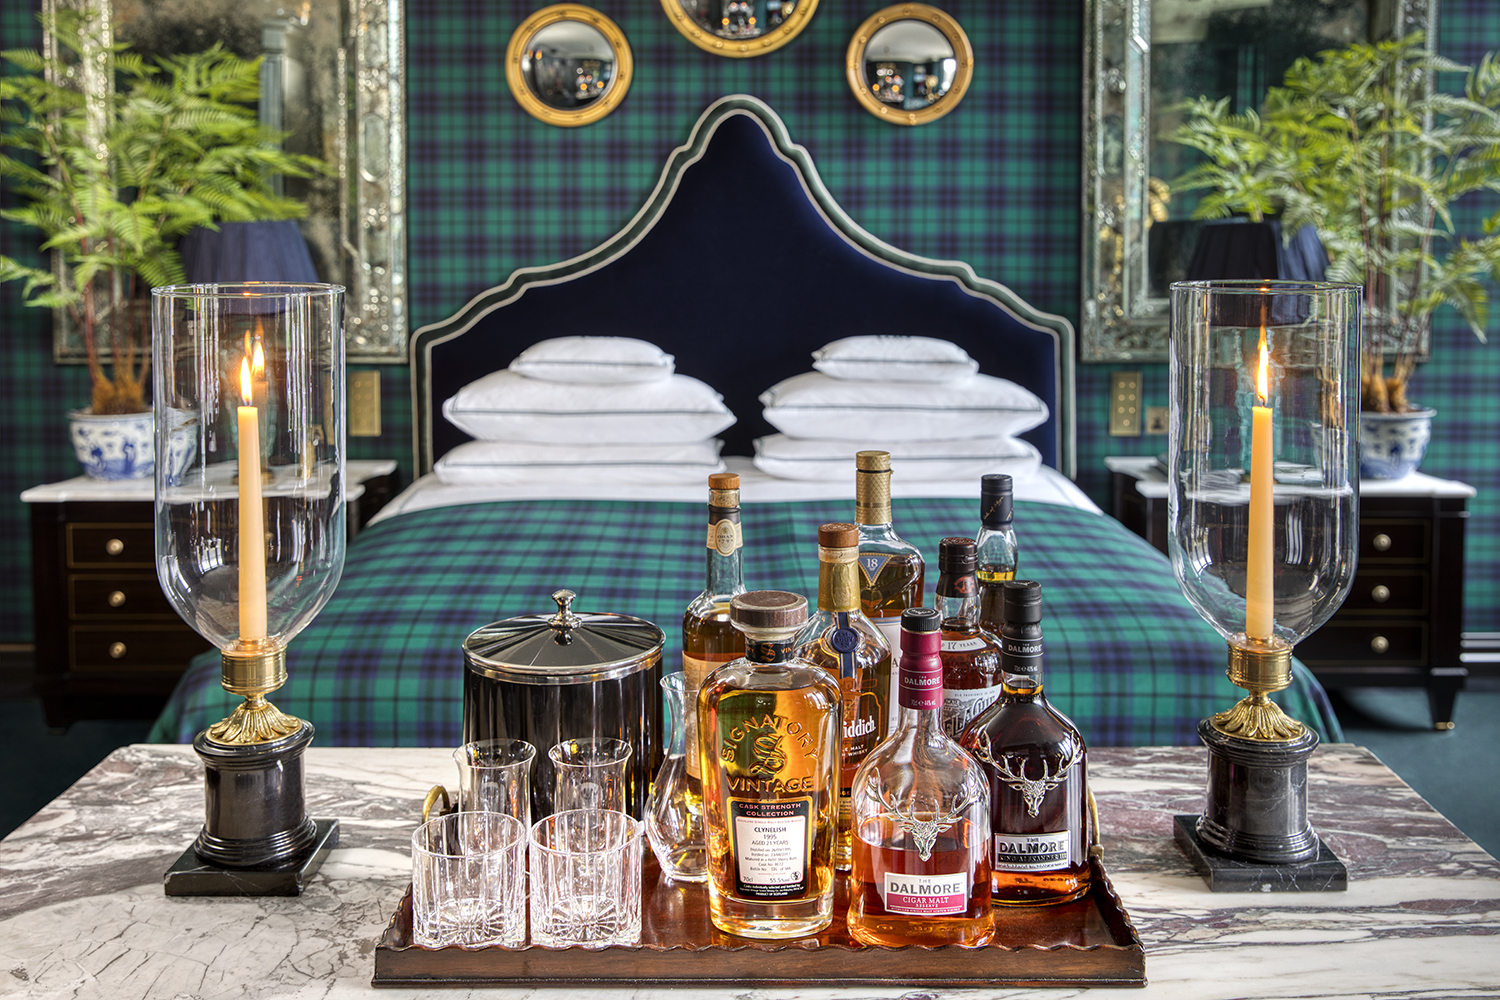 The Archibald Suite at 100 Princes Street in Edinburgh is outfitted in one of several different styles of tartan.